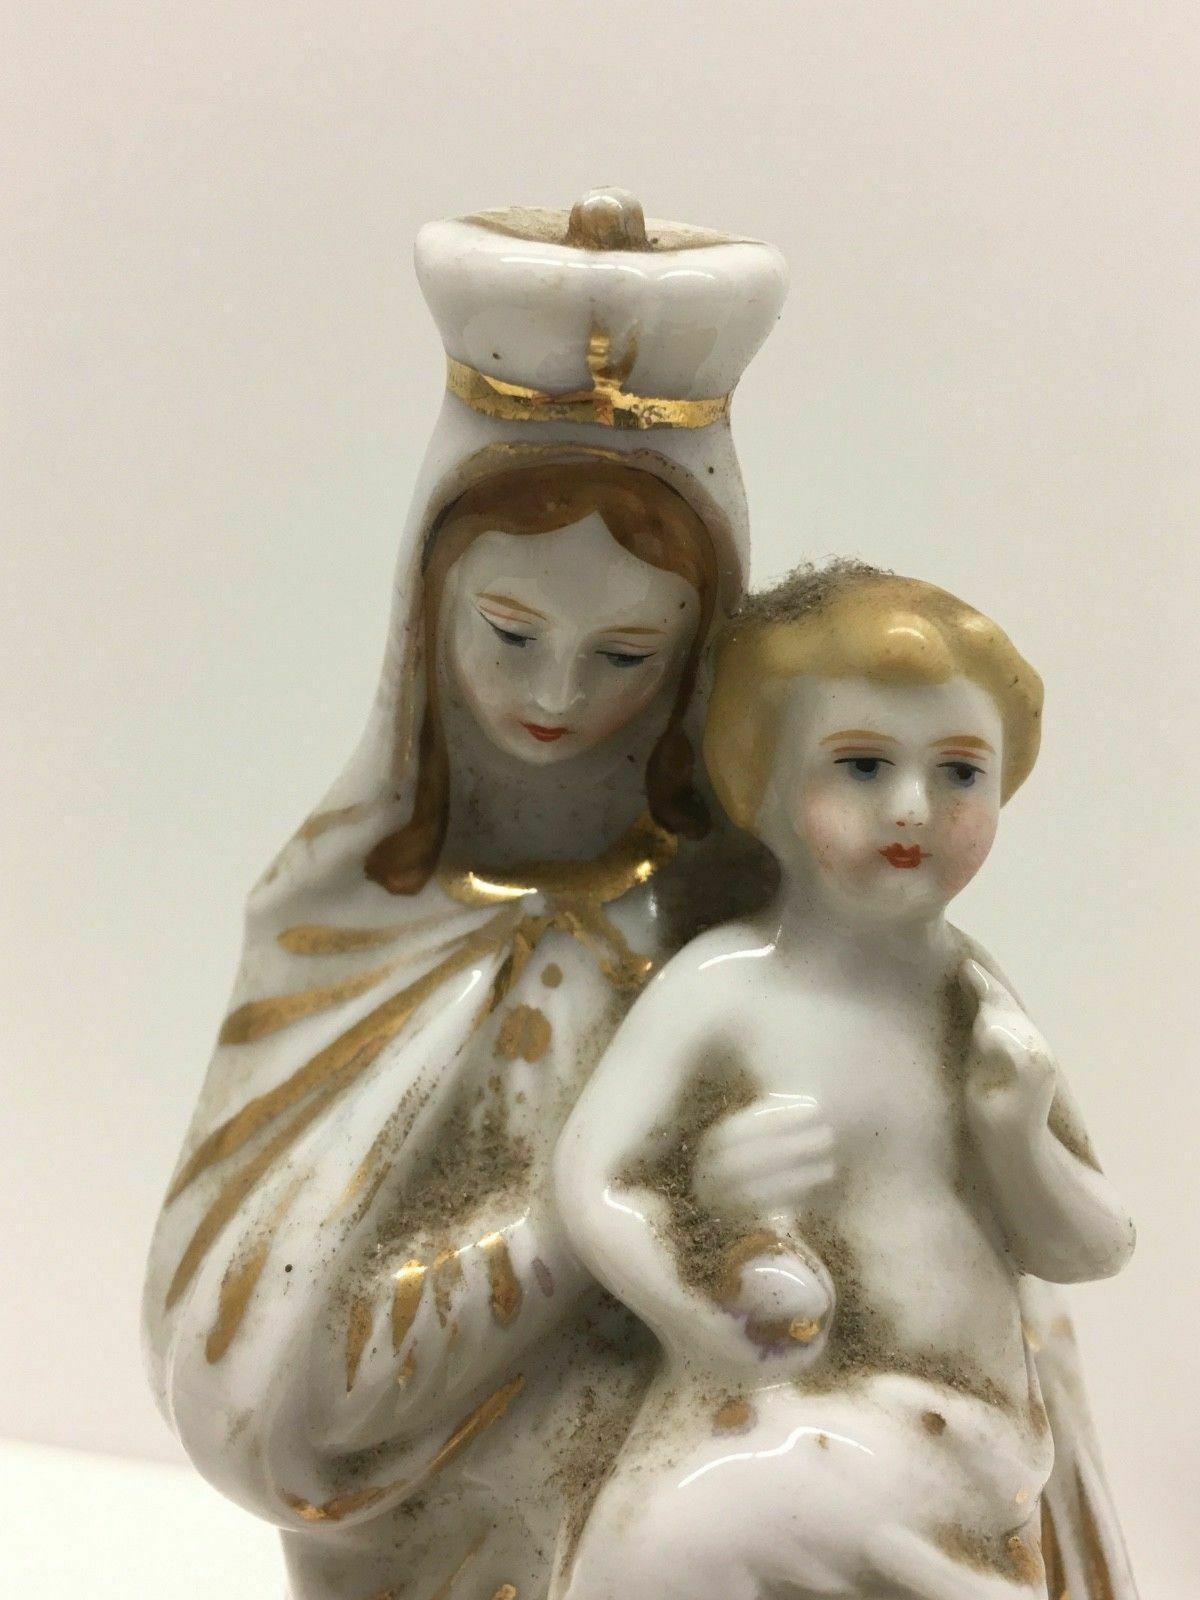 Hand-Crafted Beautiful Mary Joseph Jesus Porcelain Figures Antique, German, 1860s